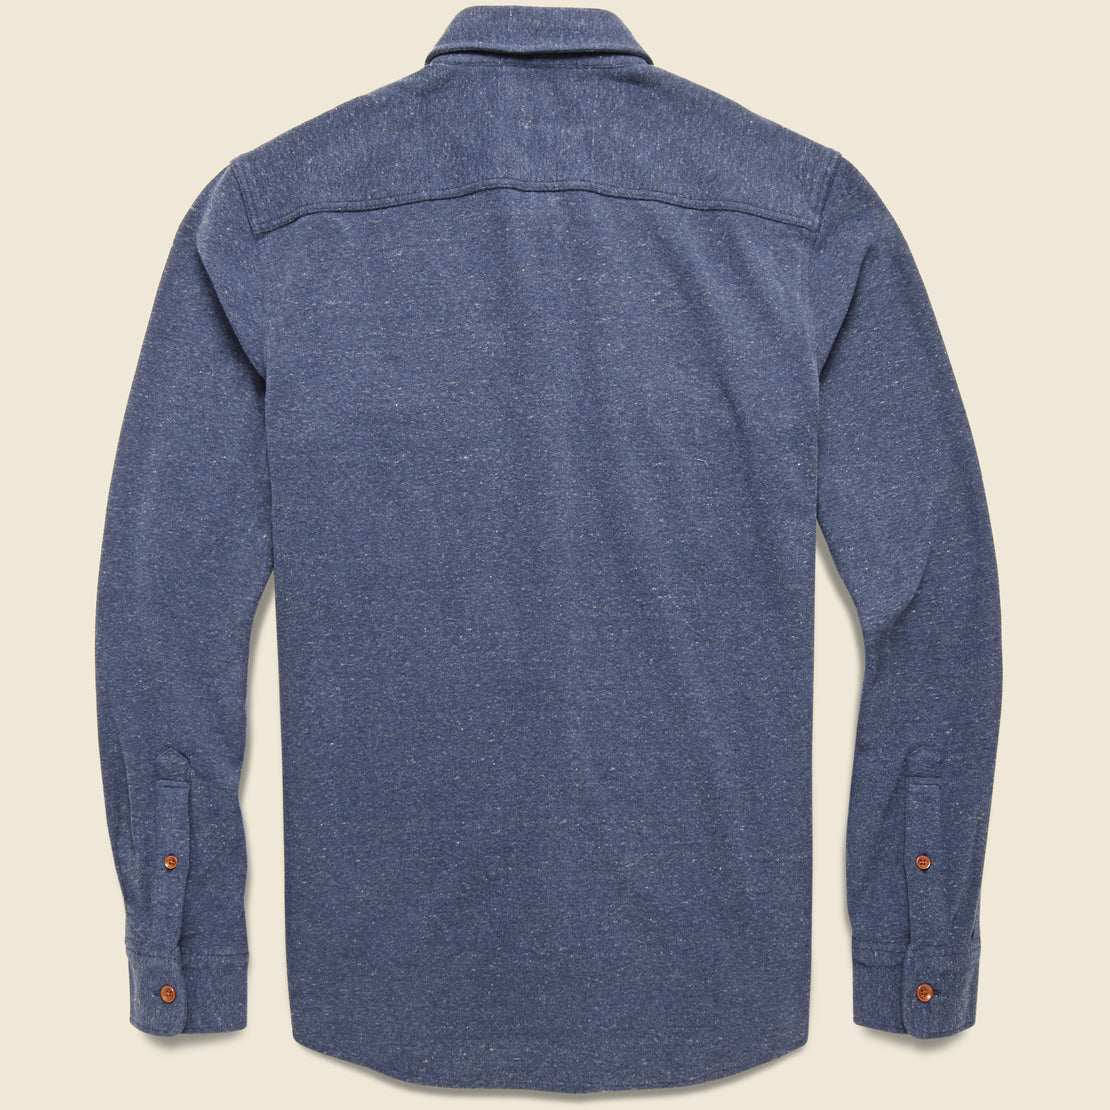 Knit Alpine Shirt - Navy - Faherty - STAG Provisions - Tops - L/S Woven - Solid